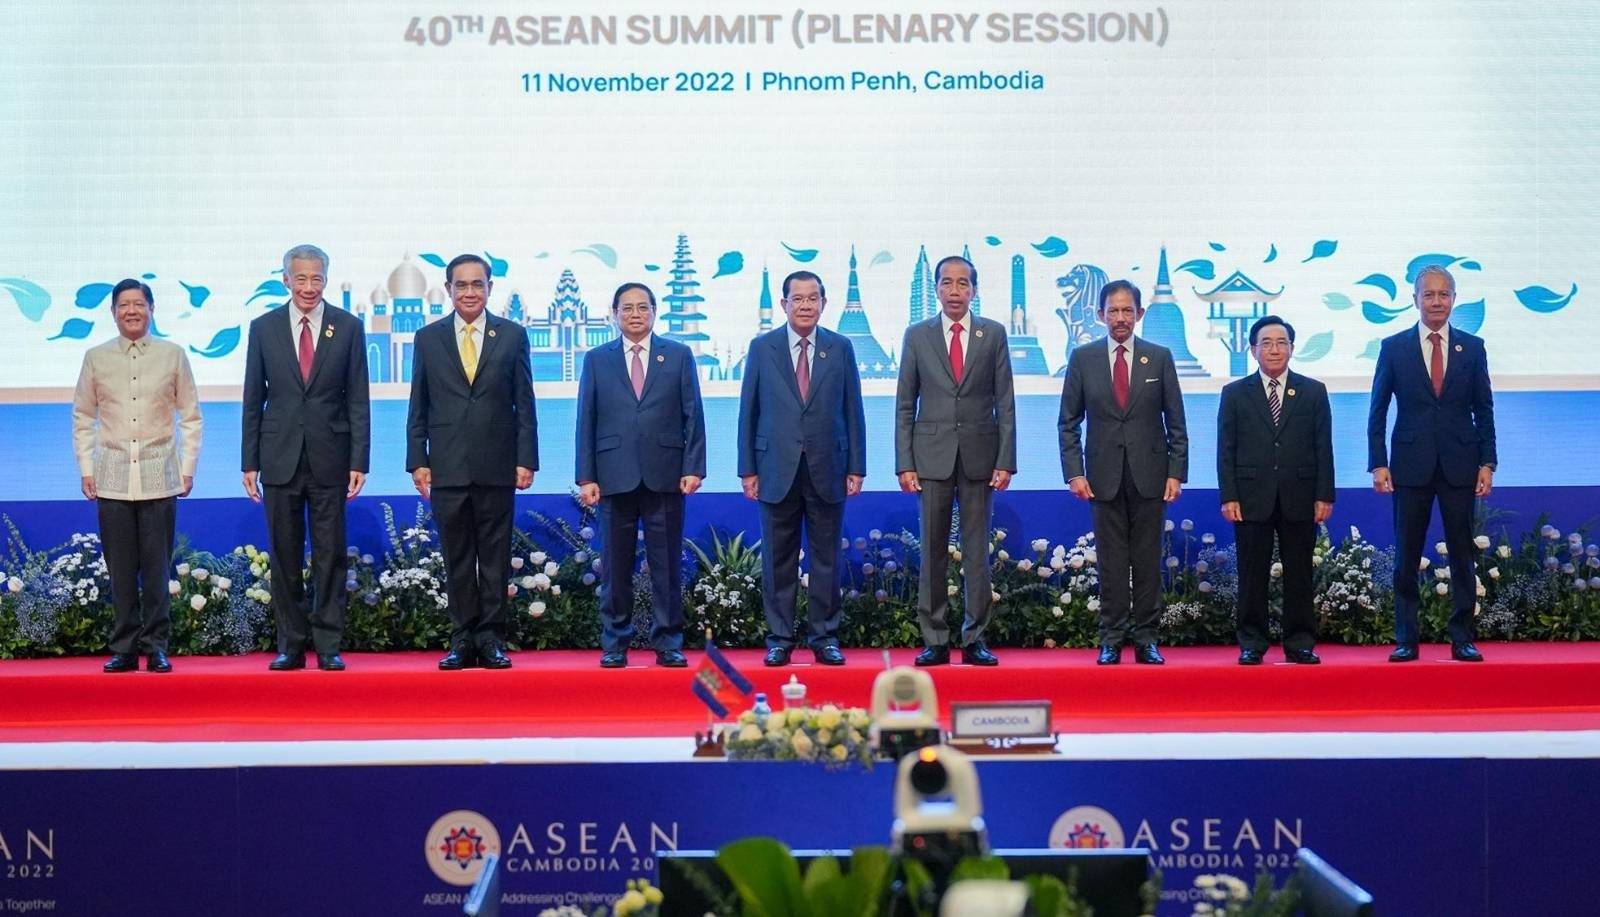 President Ferdinand R. Marcos Jr. joins the 40th ASEAN Summit Plenary Session